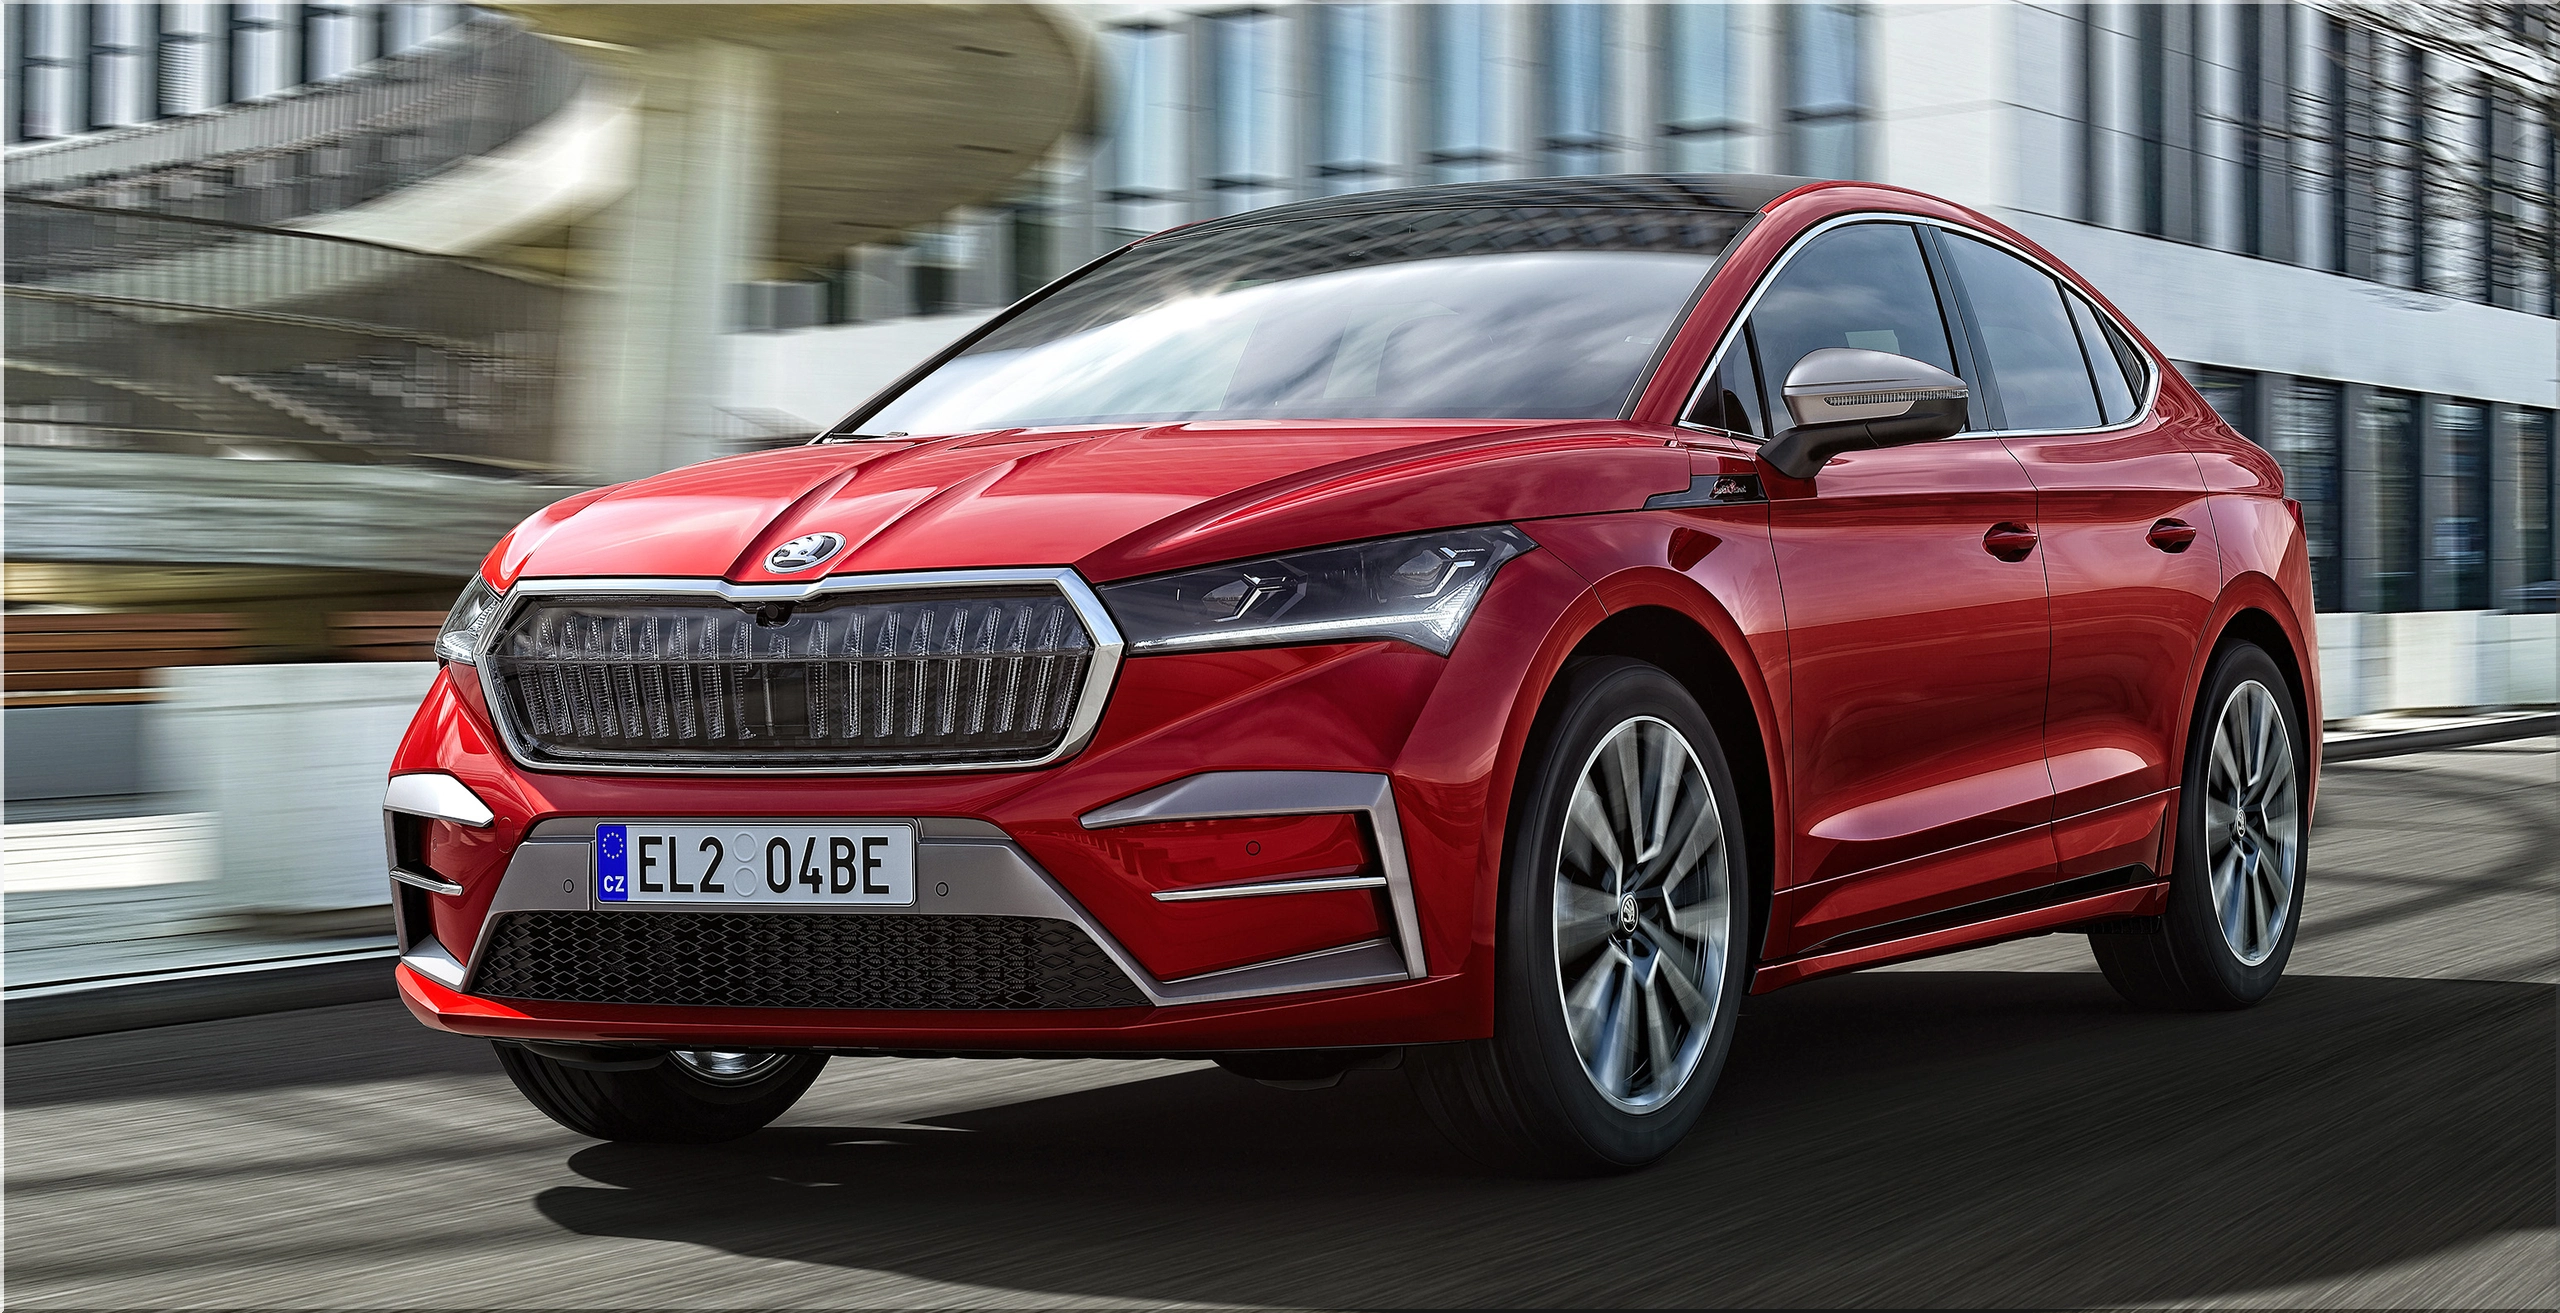 Skoda Enyaq 85: The Electric SUV That's Ready to Take on the World